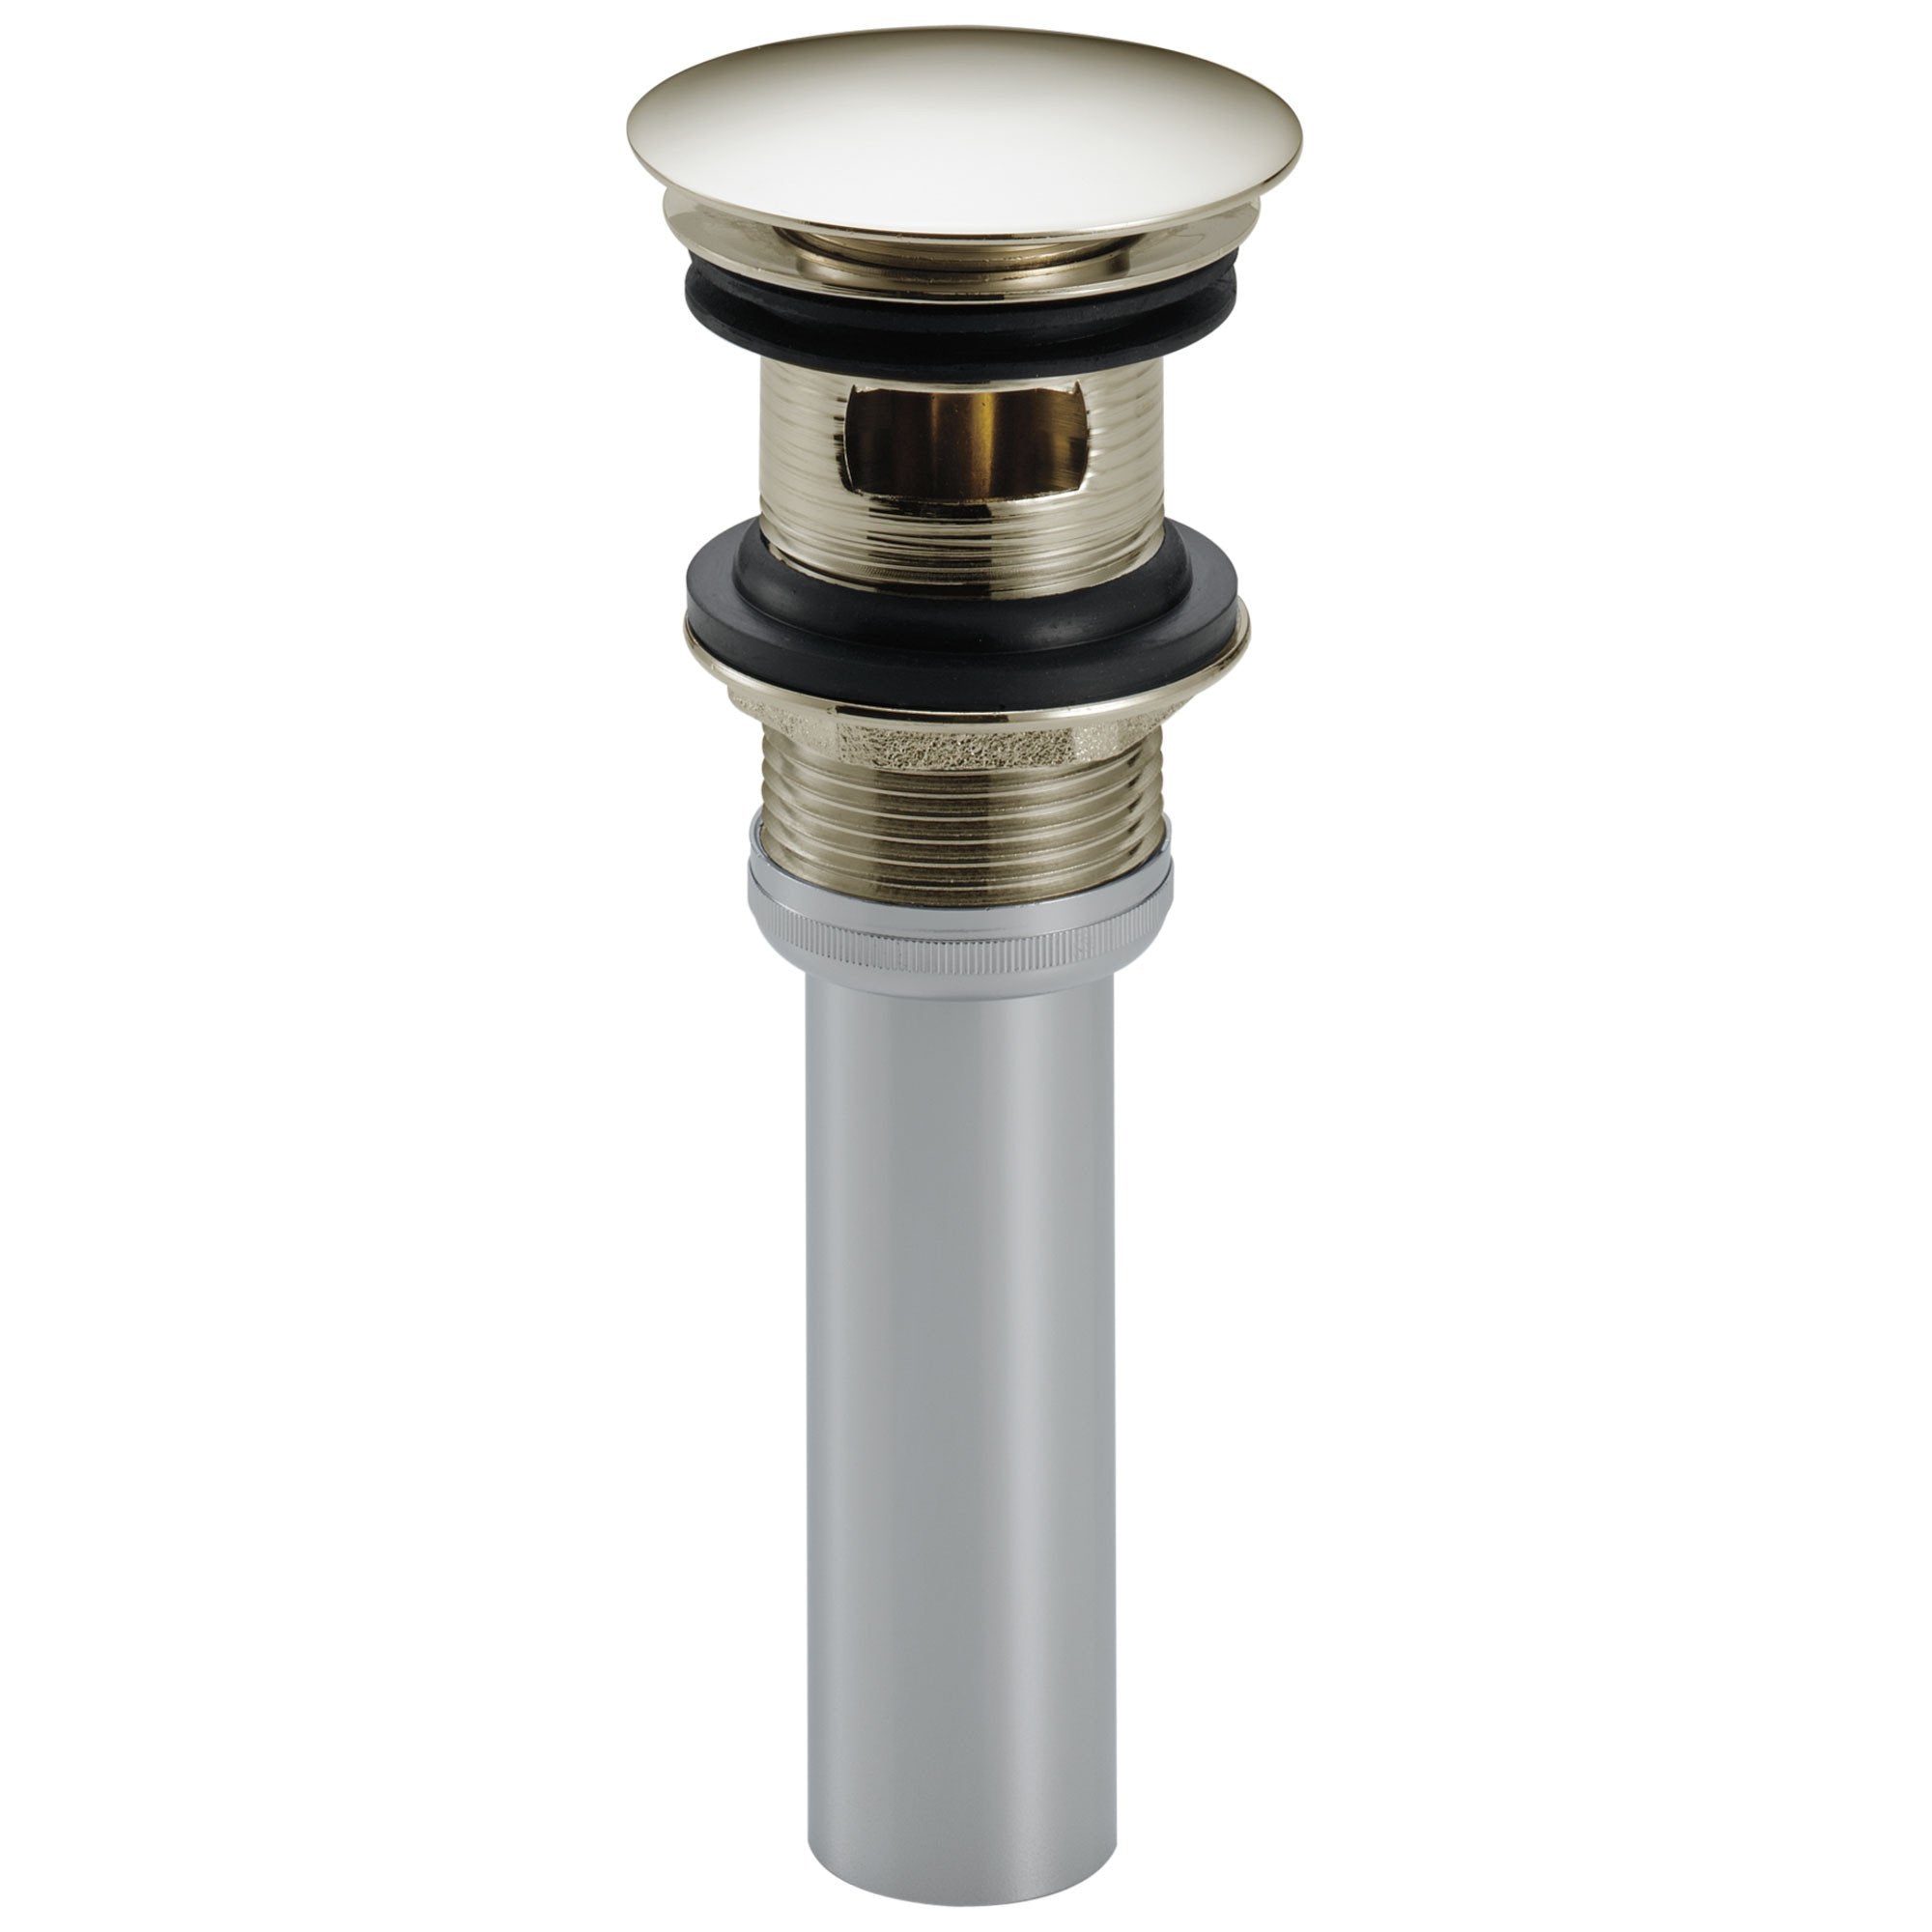 Delta Polished Nickel Finish Push Pop-Up Bathroom Sink Drain with Overflow D72173PN